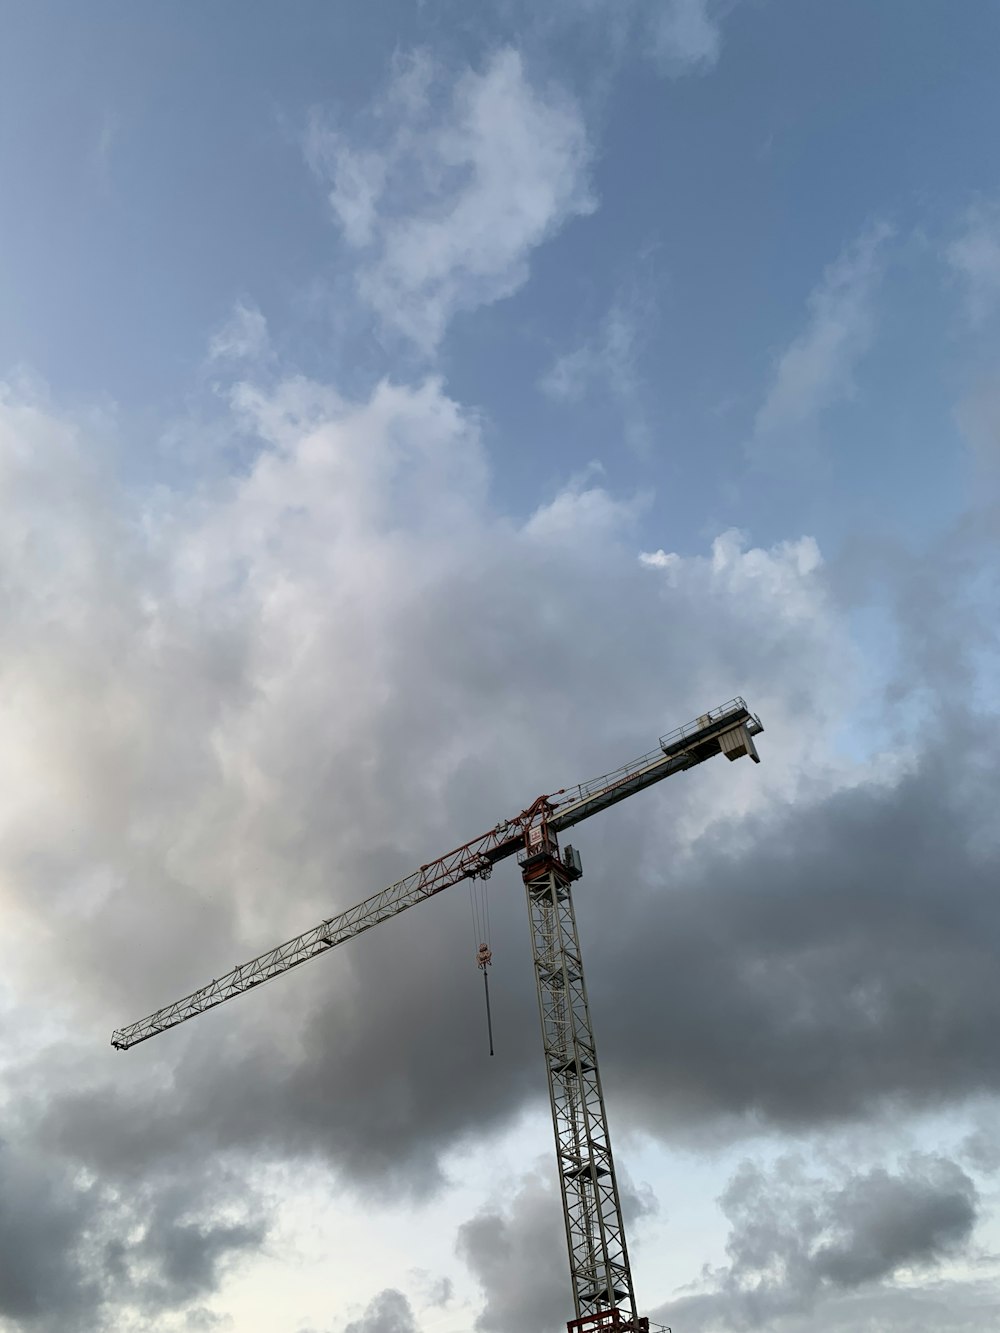 a crane is standing in the middle of a cloudy sky